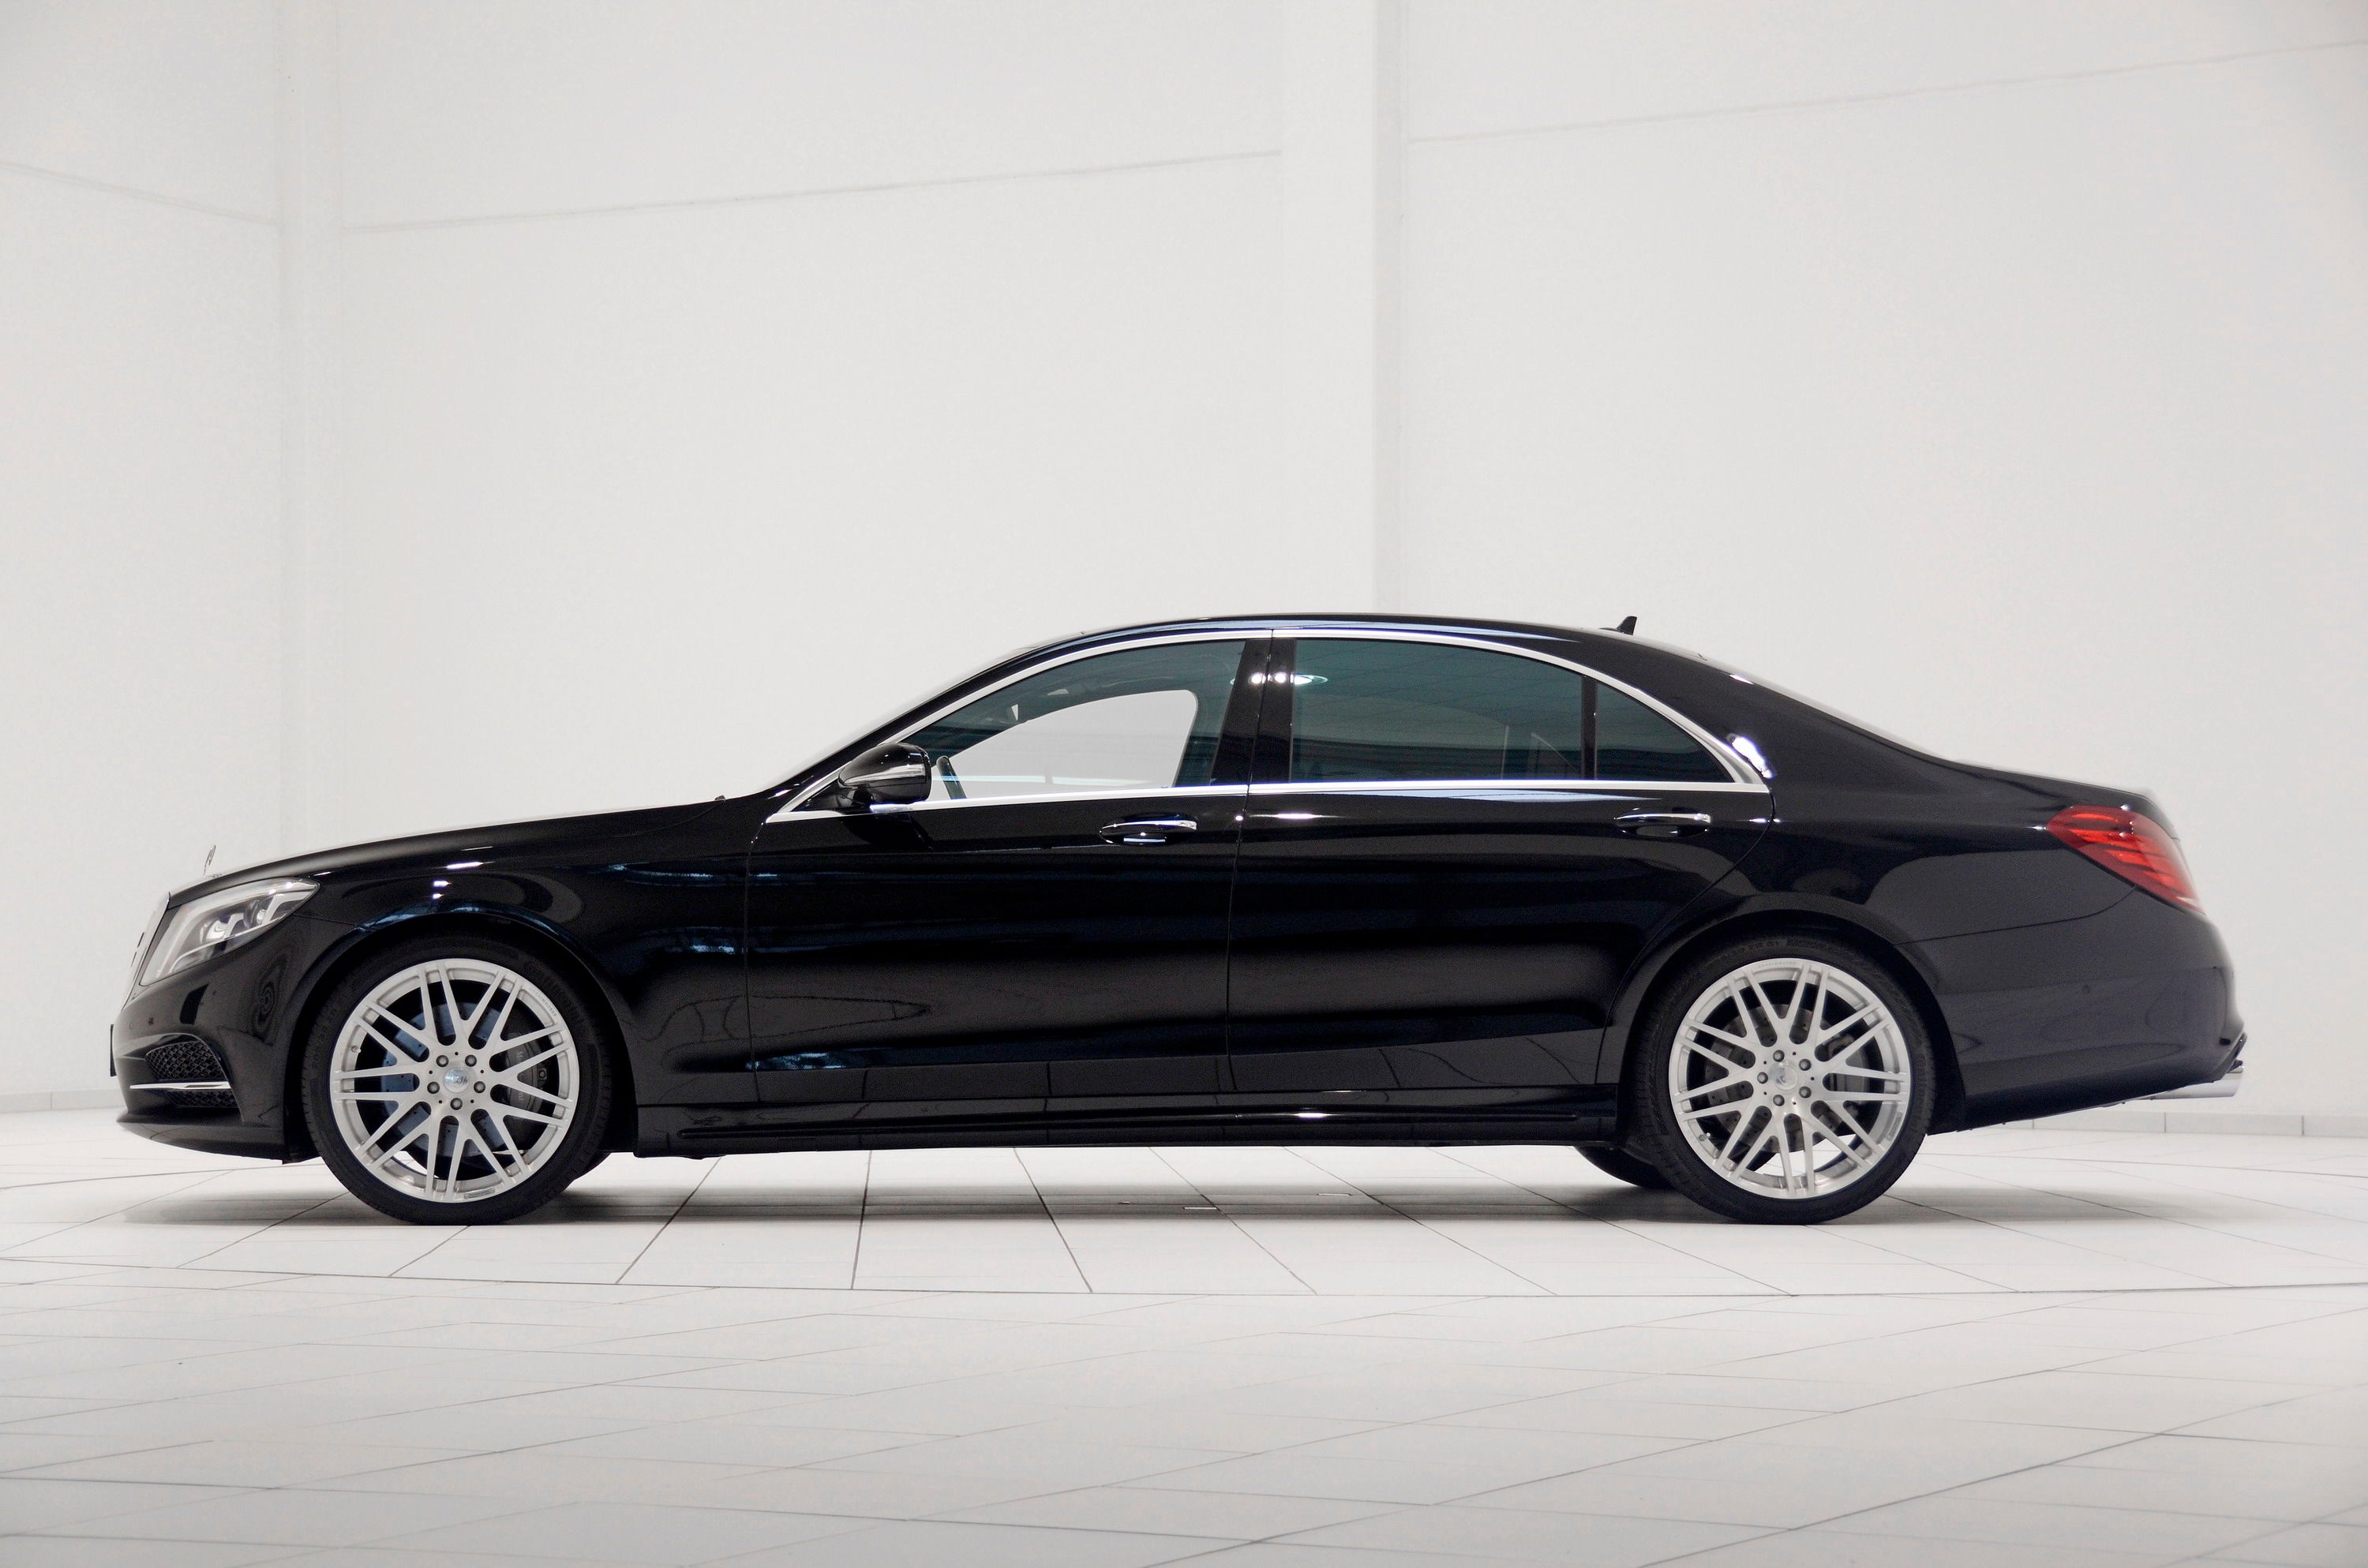 2014 Mercedes S-Class by Brabus